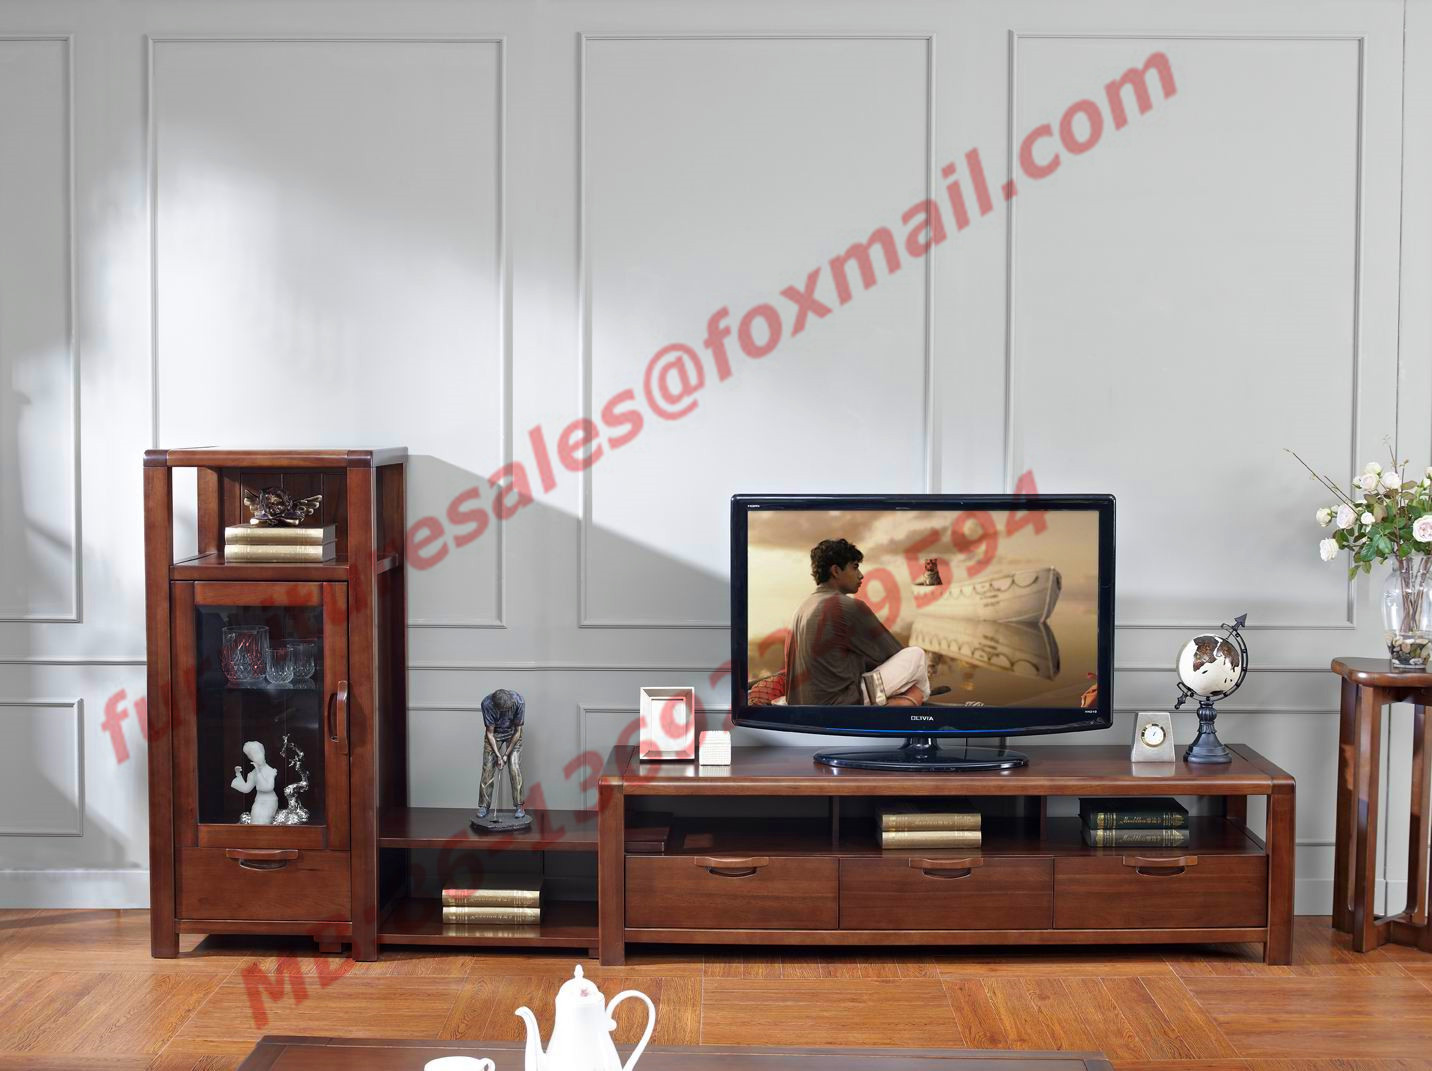 China Wooden Combination Cabinet in Living Room Furniture wholesale